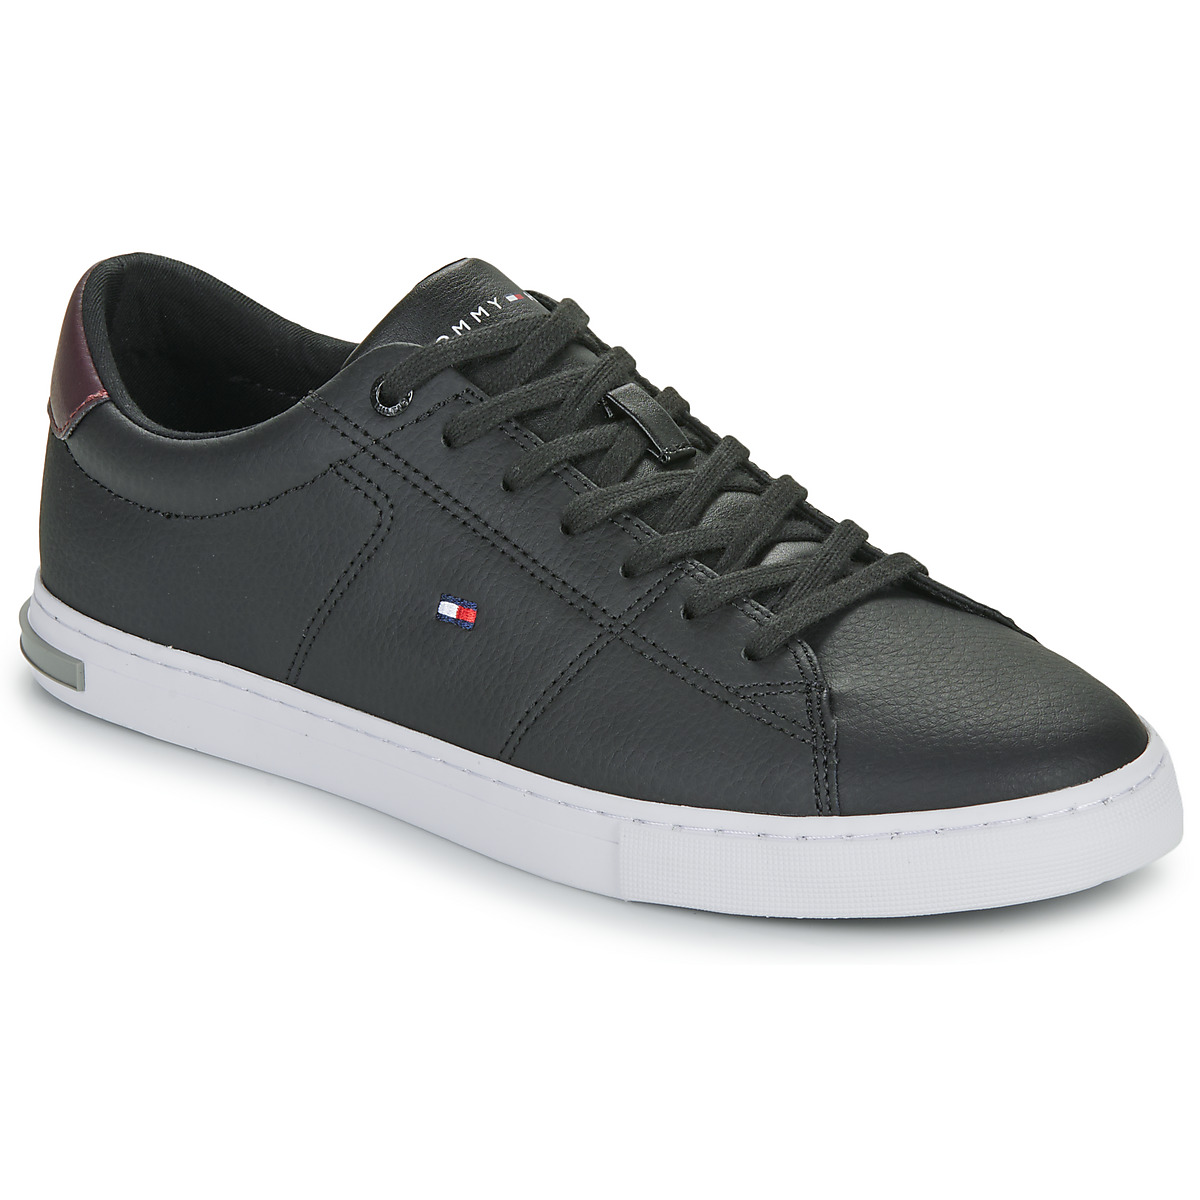 Scarpe Uomo Sneakers basse Tommy Hilfiger ESSENTIAL LEATHER DETAIL VULC Nero